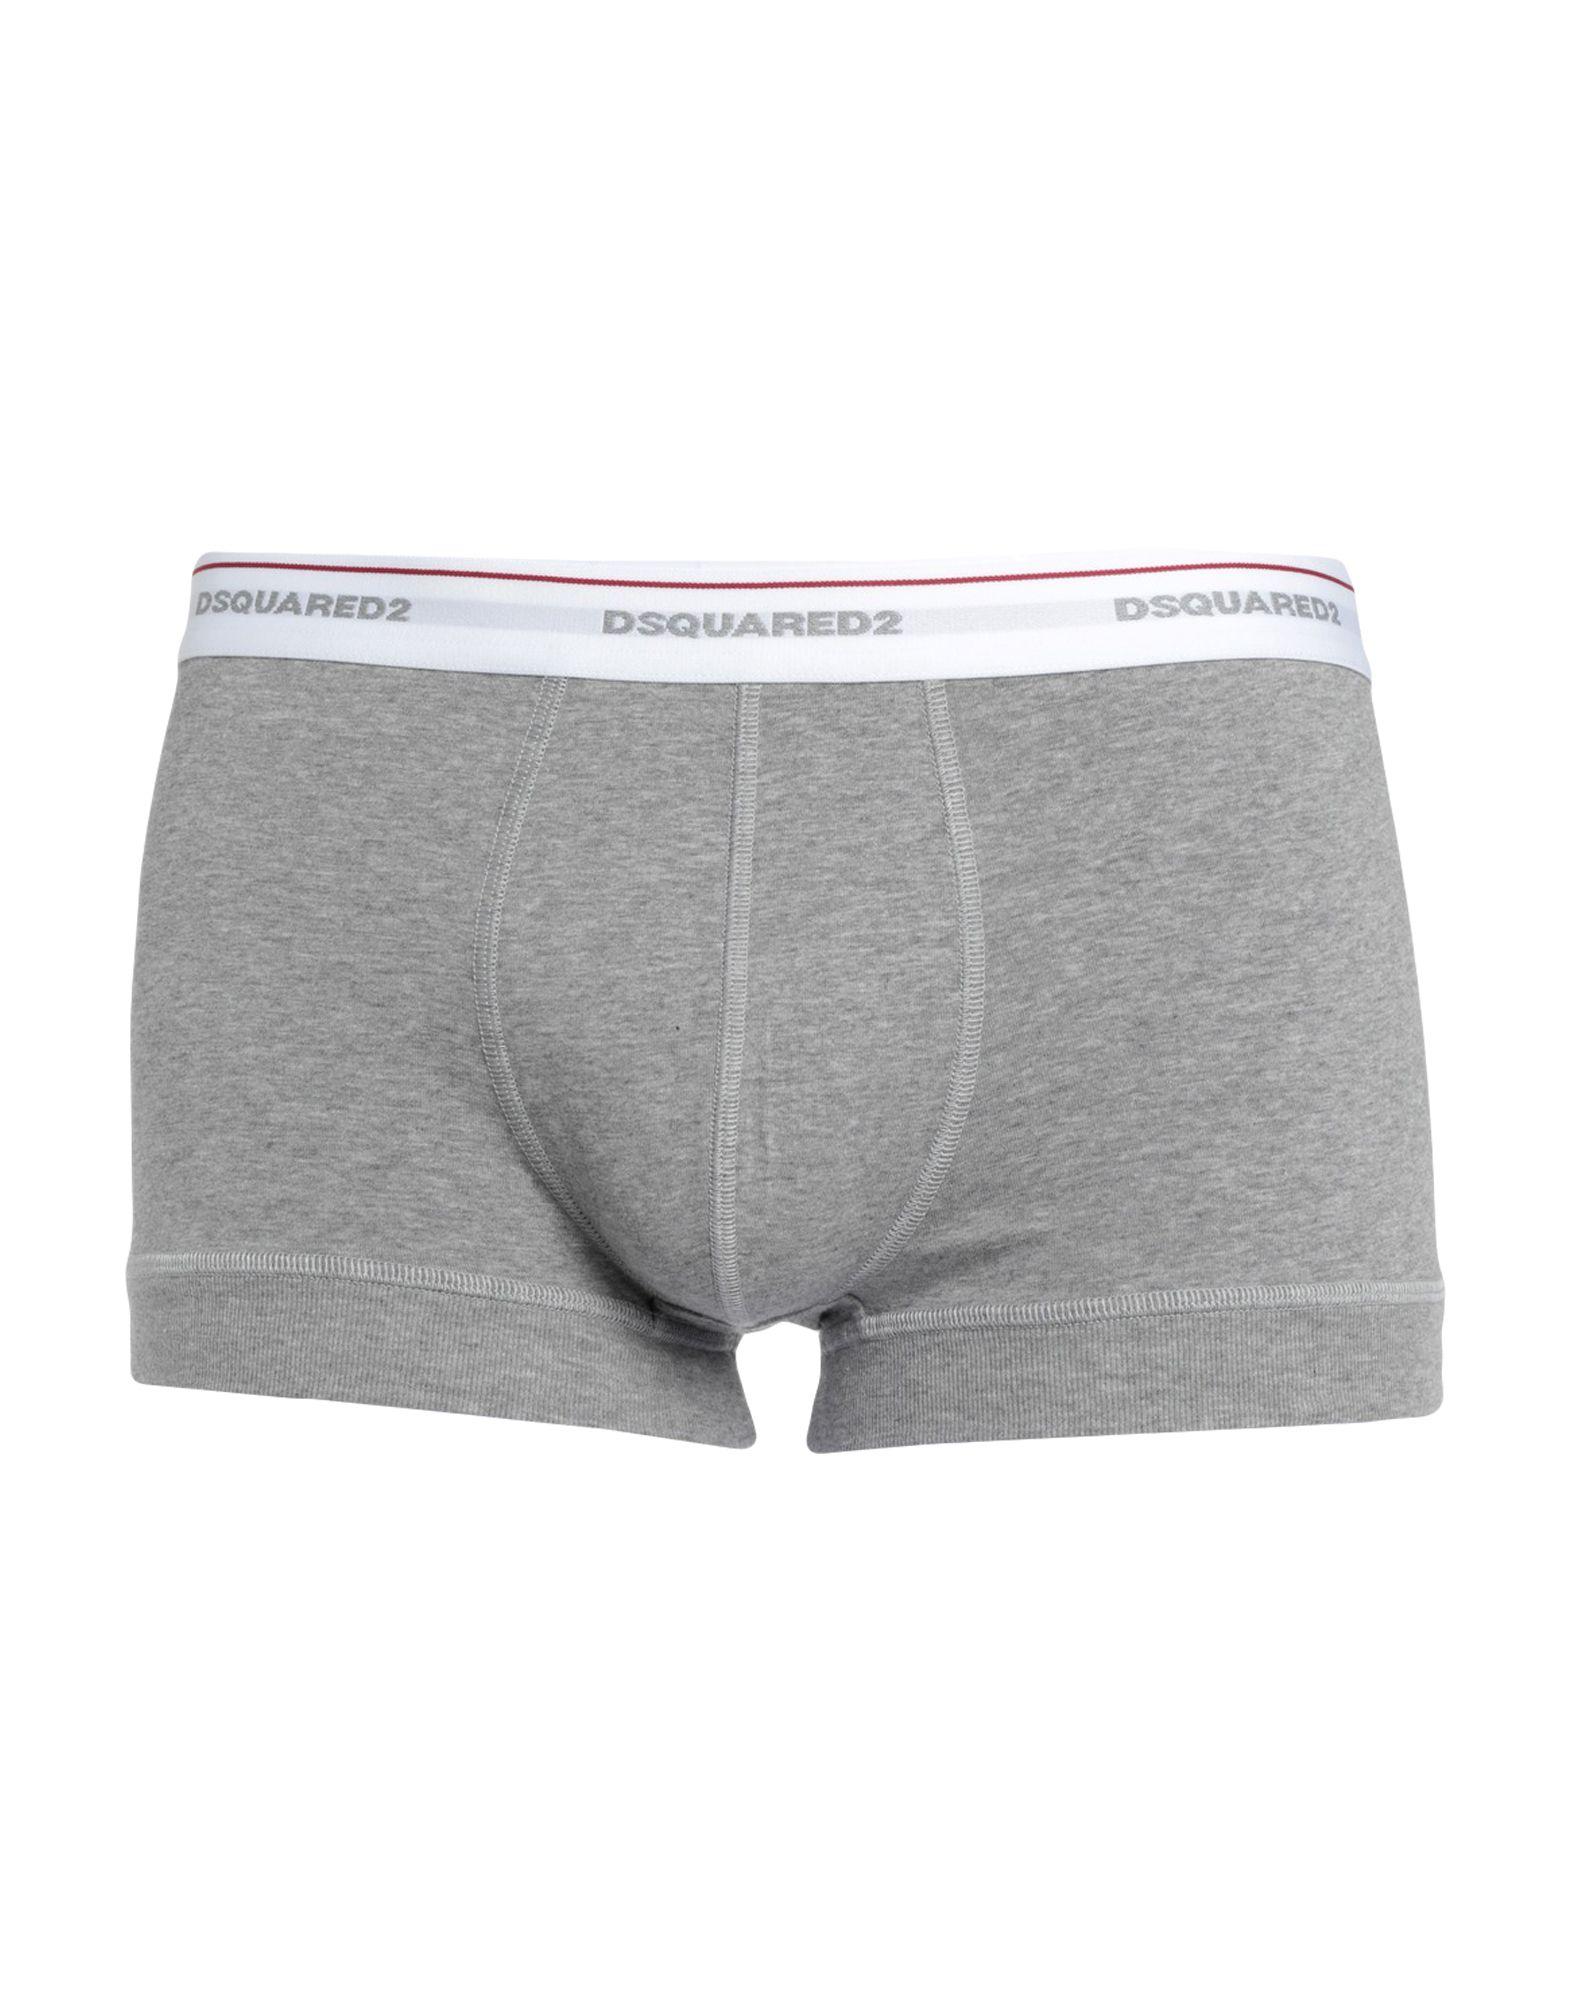 DSquared² Boxer in Grey (Gray) for Men - Save 13% - Lyst